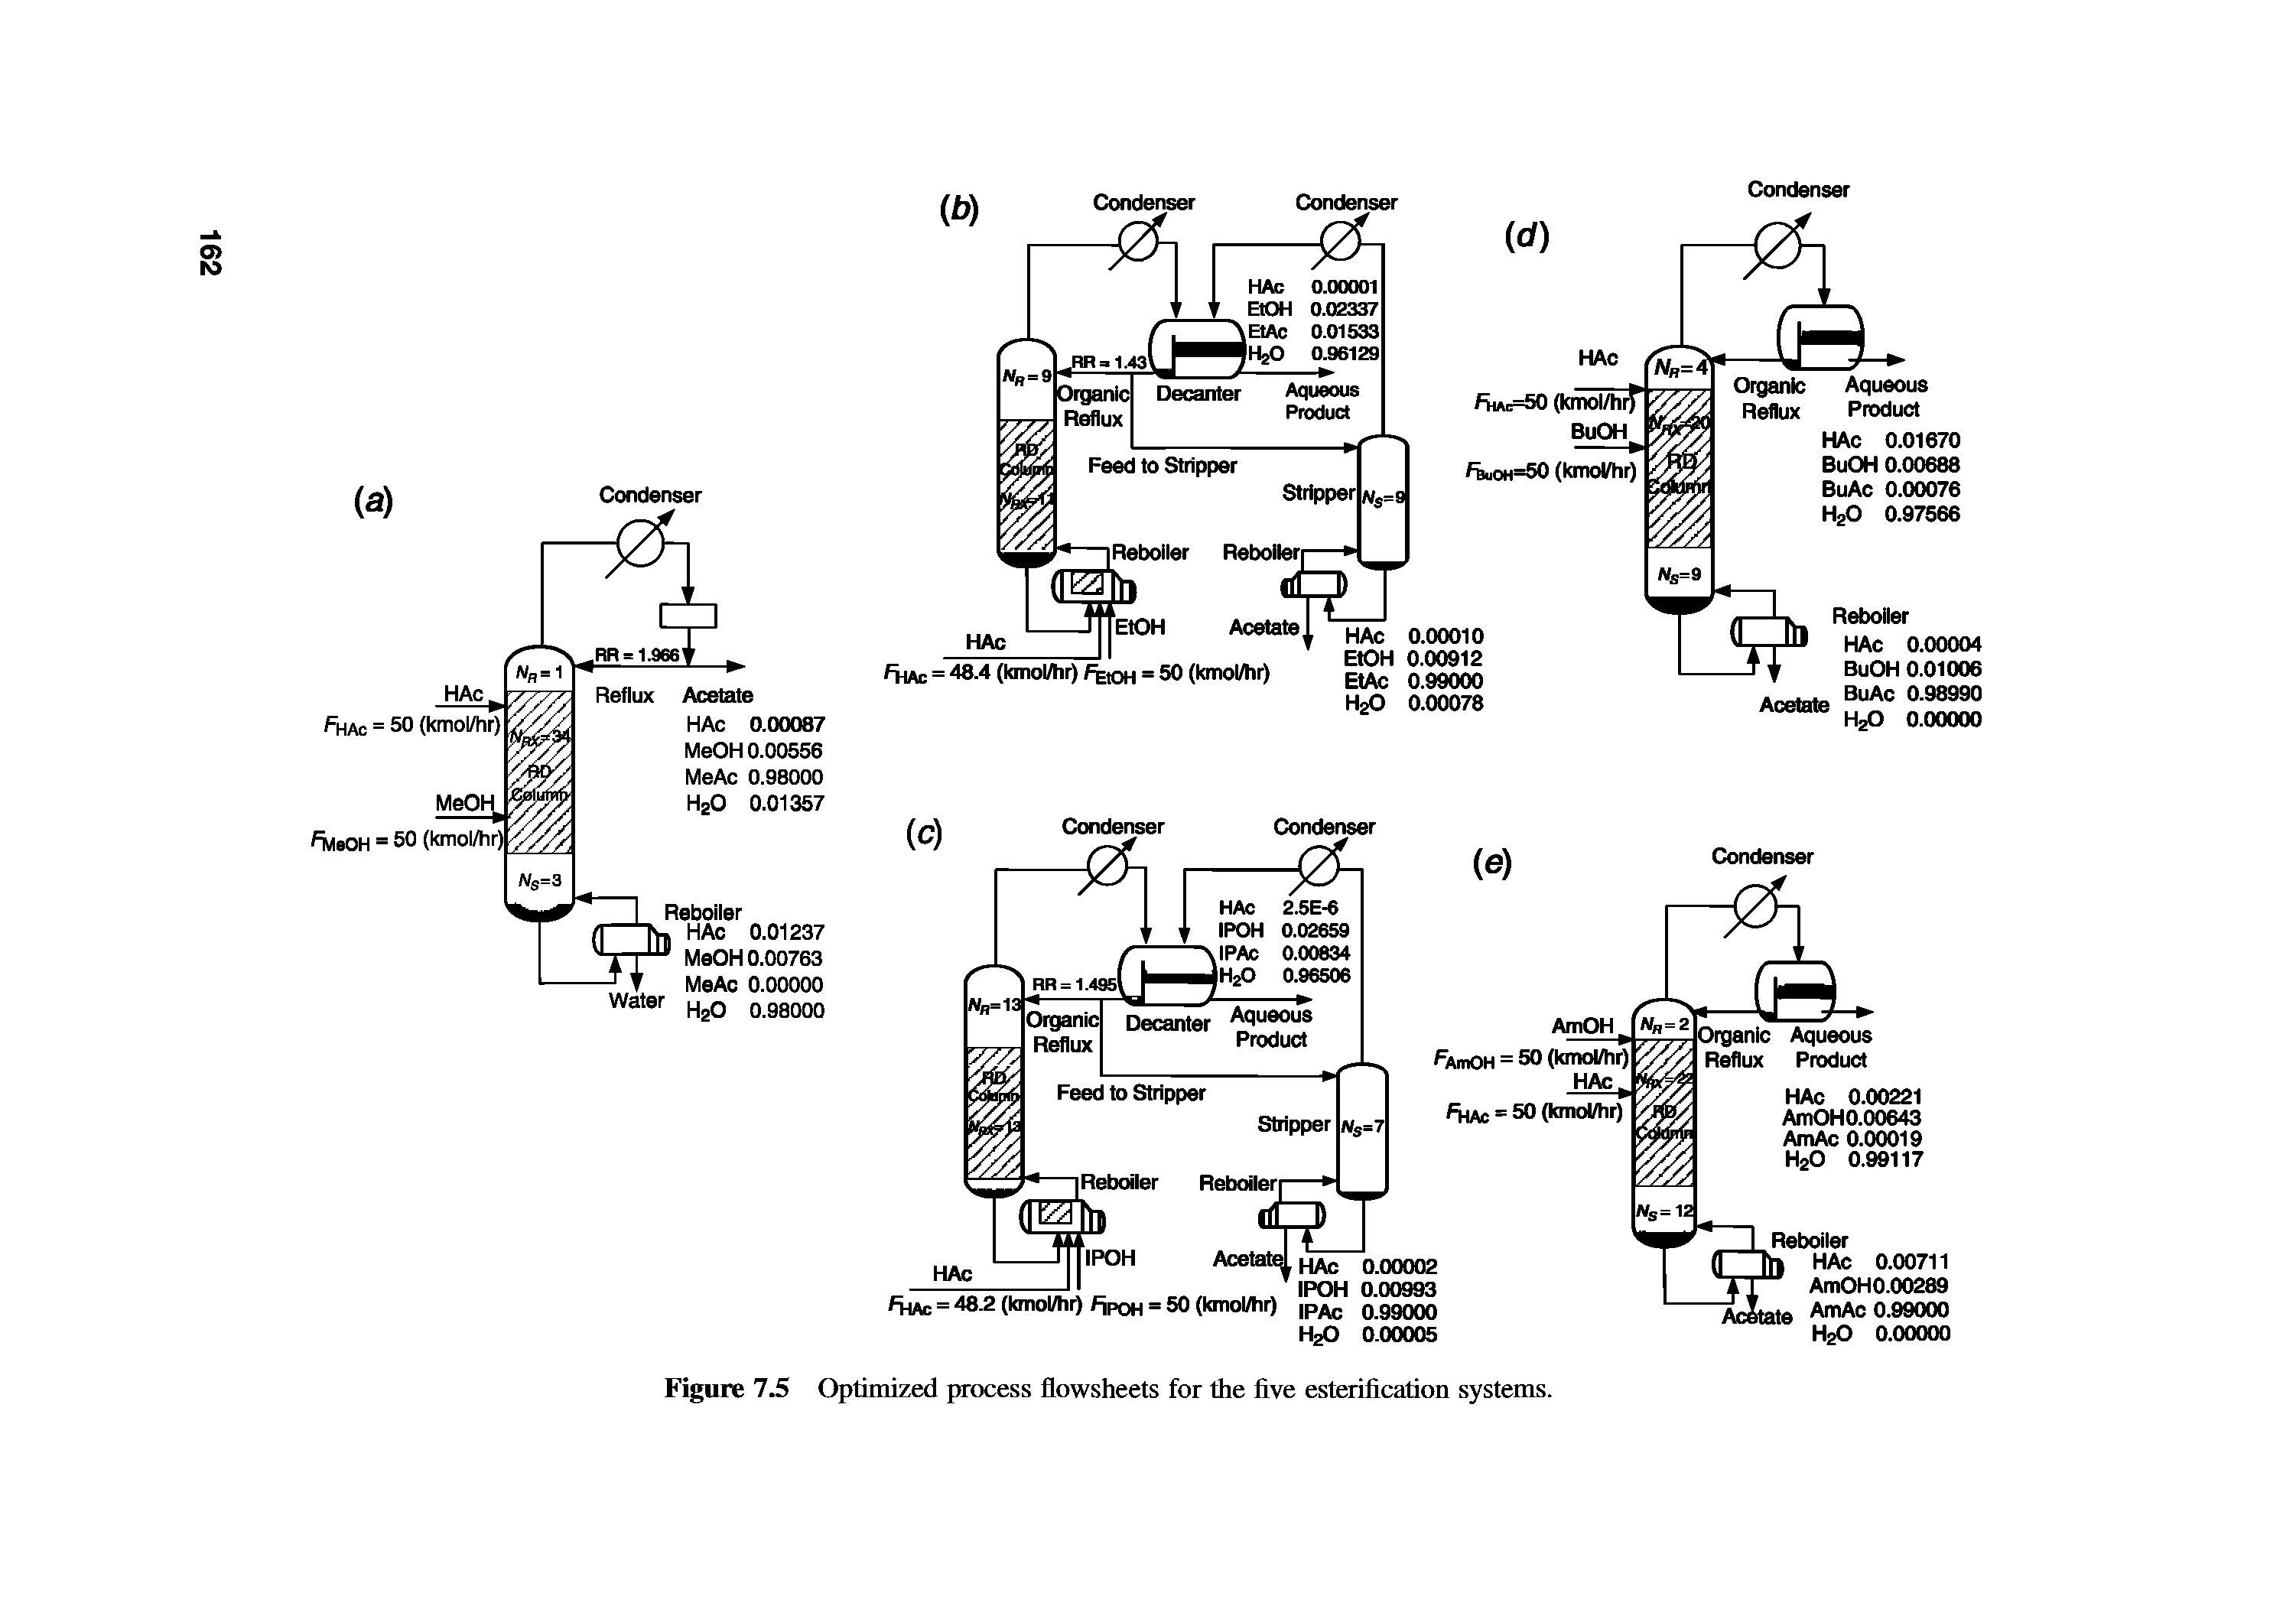 Figure 7.5 Optimized process flowsheets for the five esterification systems.